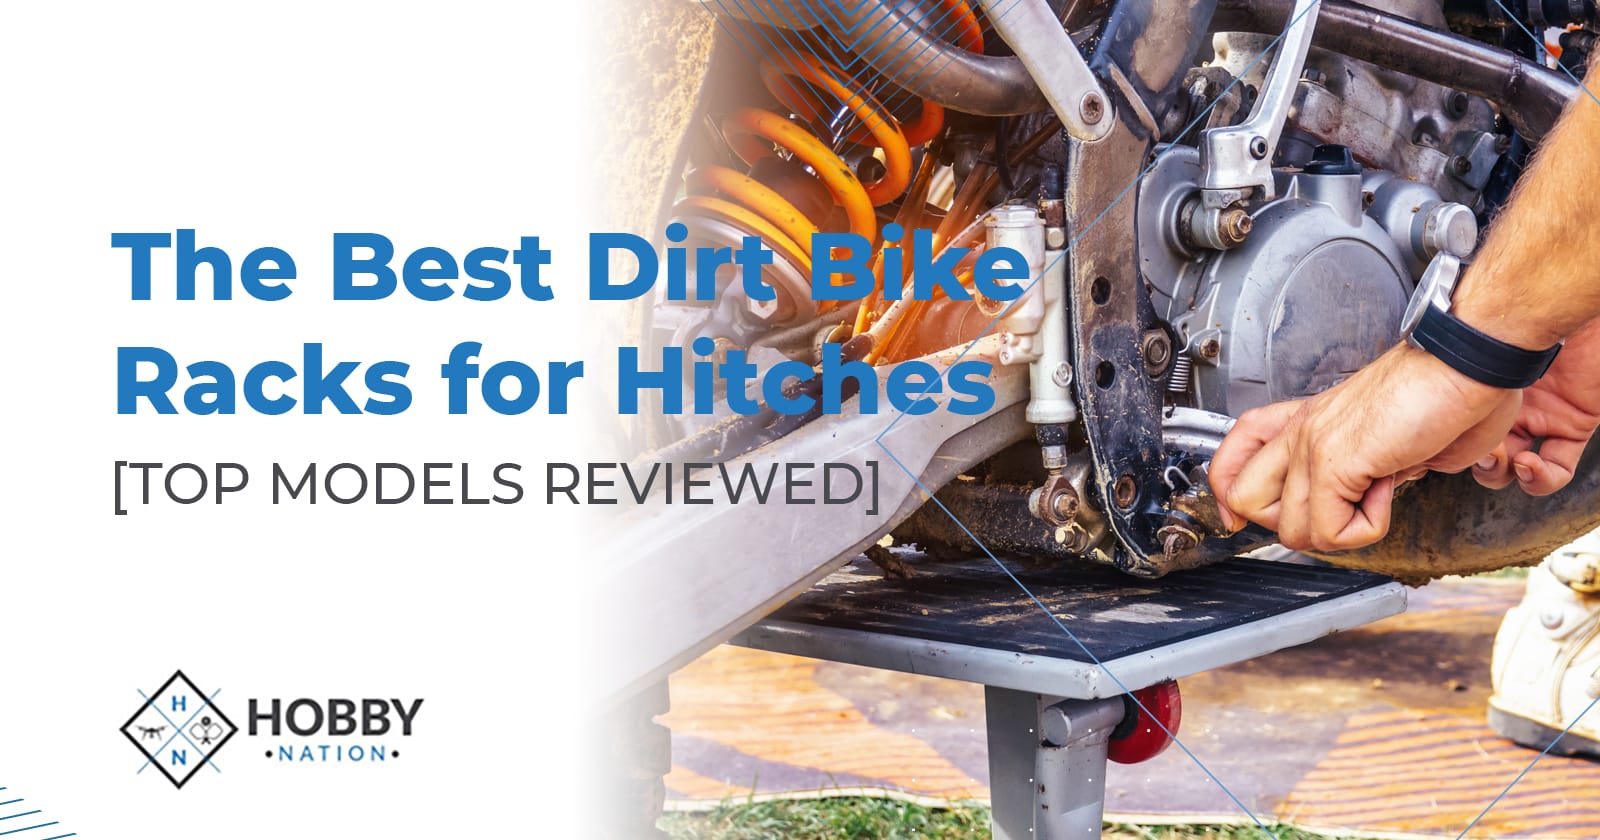 The Best Dirt Bike Racks for Hitches [TOP MODELS REVIEWED]